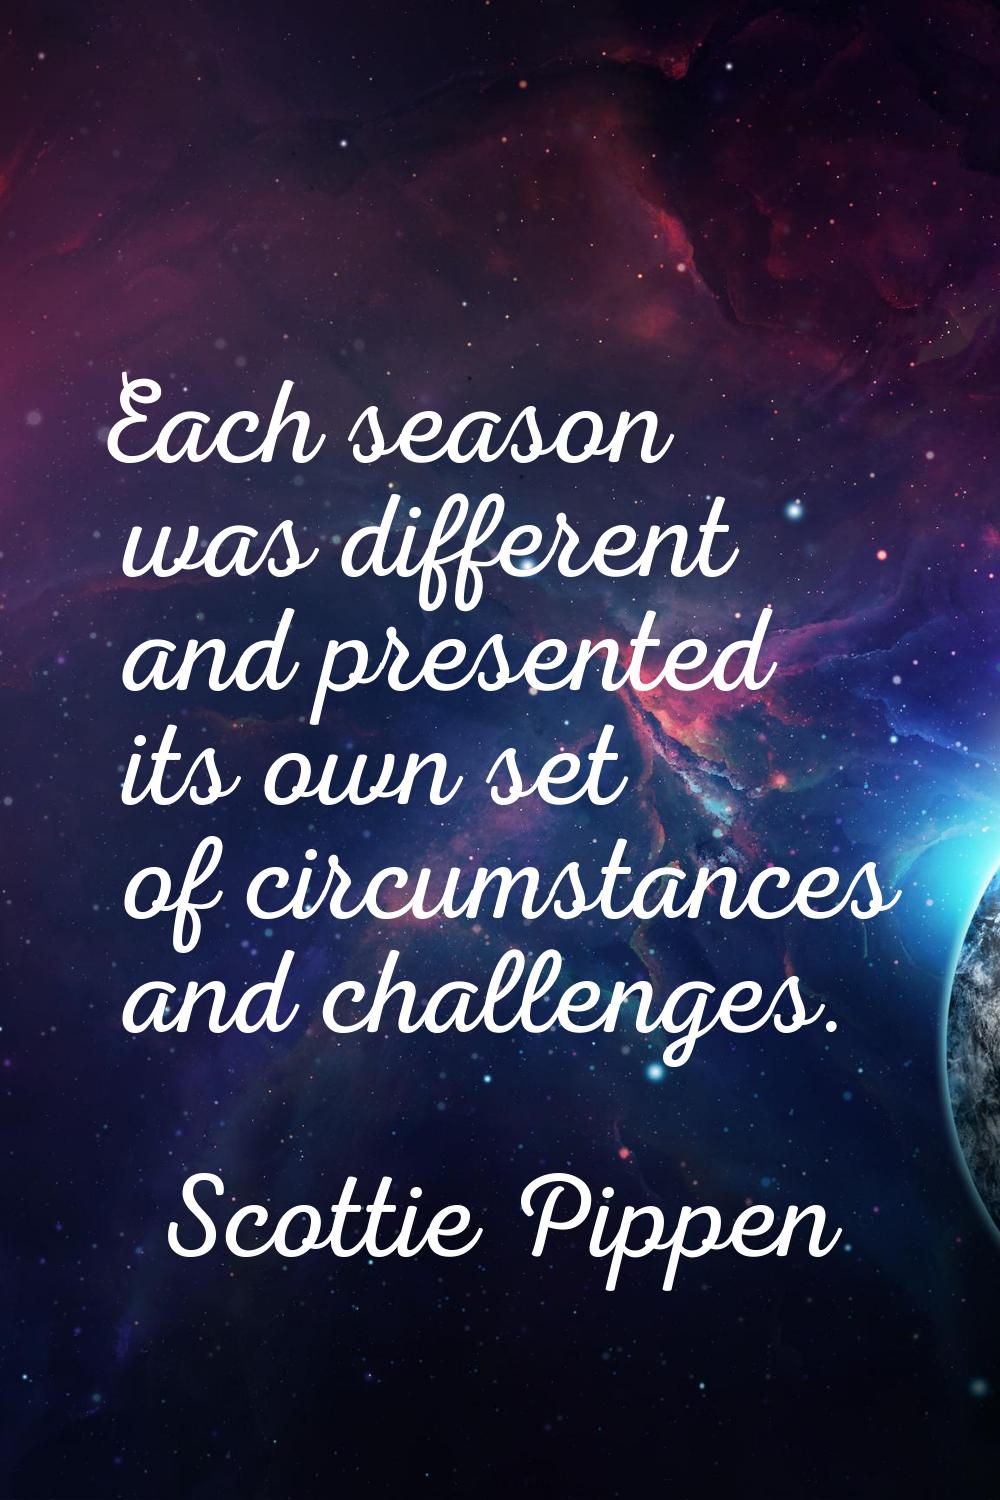 Each season was different and presented its own set of circumstances and challenges.